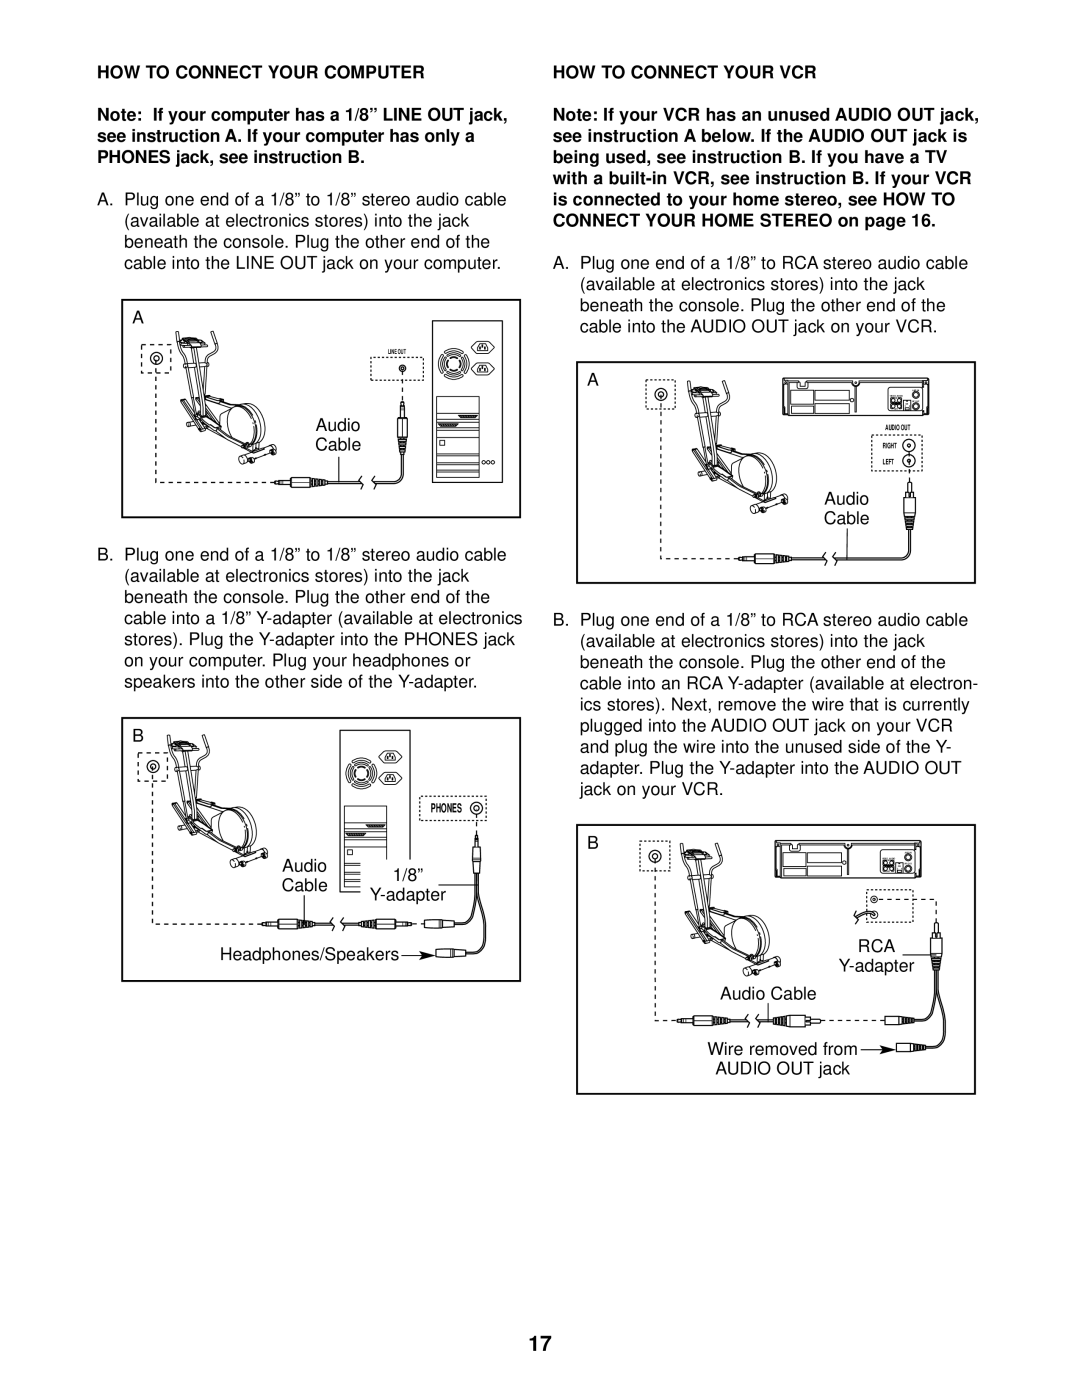 ProForm 831.285284 How To Connect Your Computer, PHONES jack, see instruction B, How To Connect Your Vcr, Y-adapter 